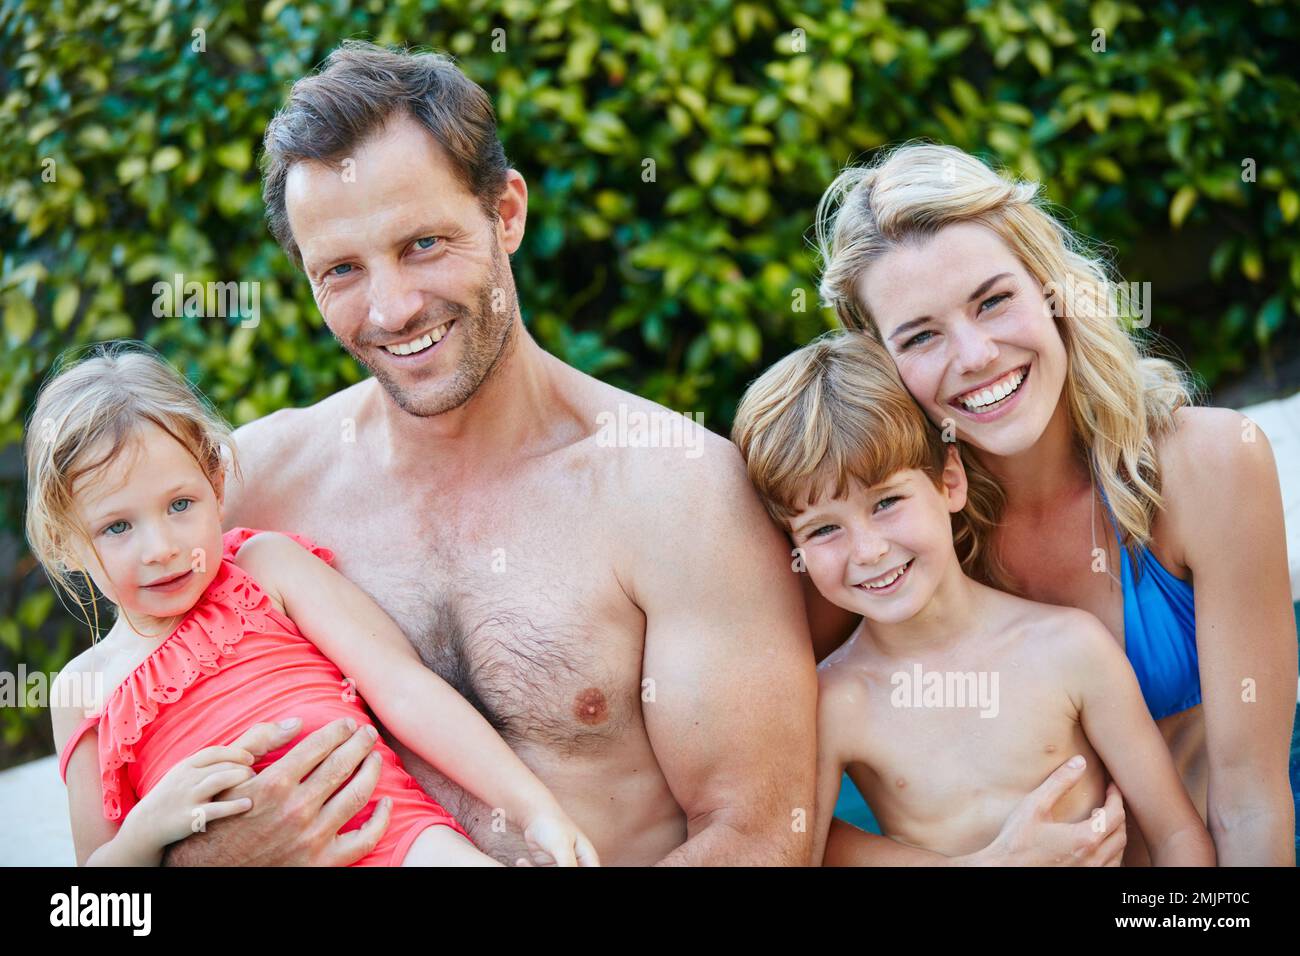 Filling each others lives with endless amounts of love. Portrait of a family enjoying a day outdoors together. Stock Photo